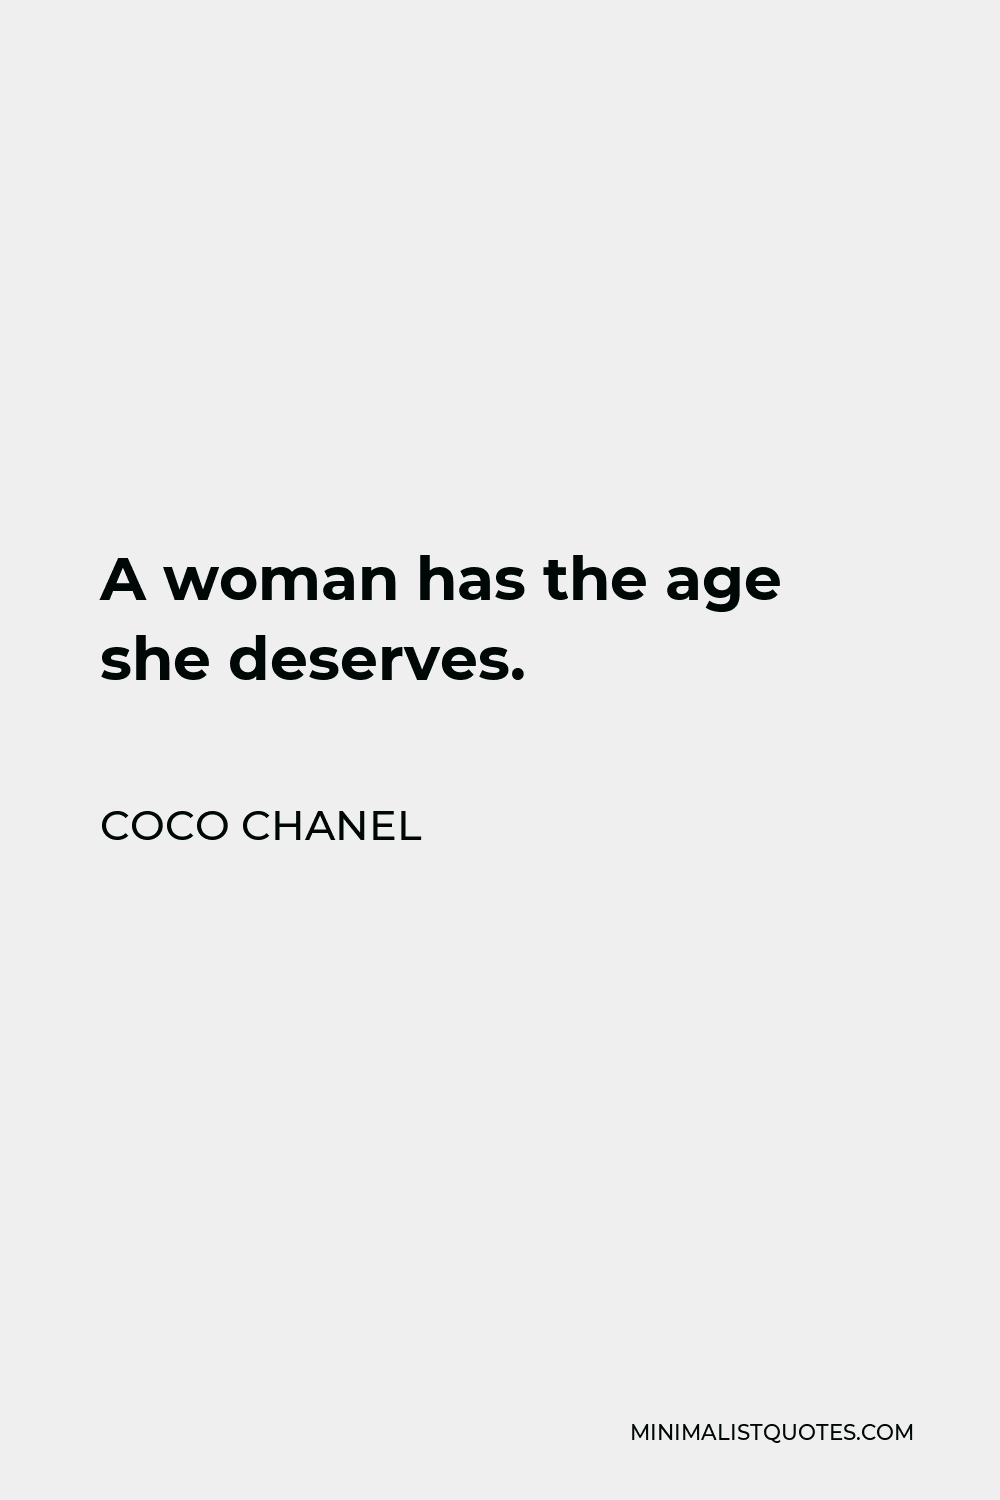 Coco Chanel Quote: A woman has the age she deserves.